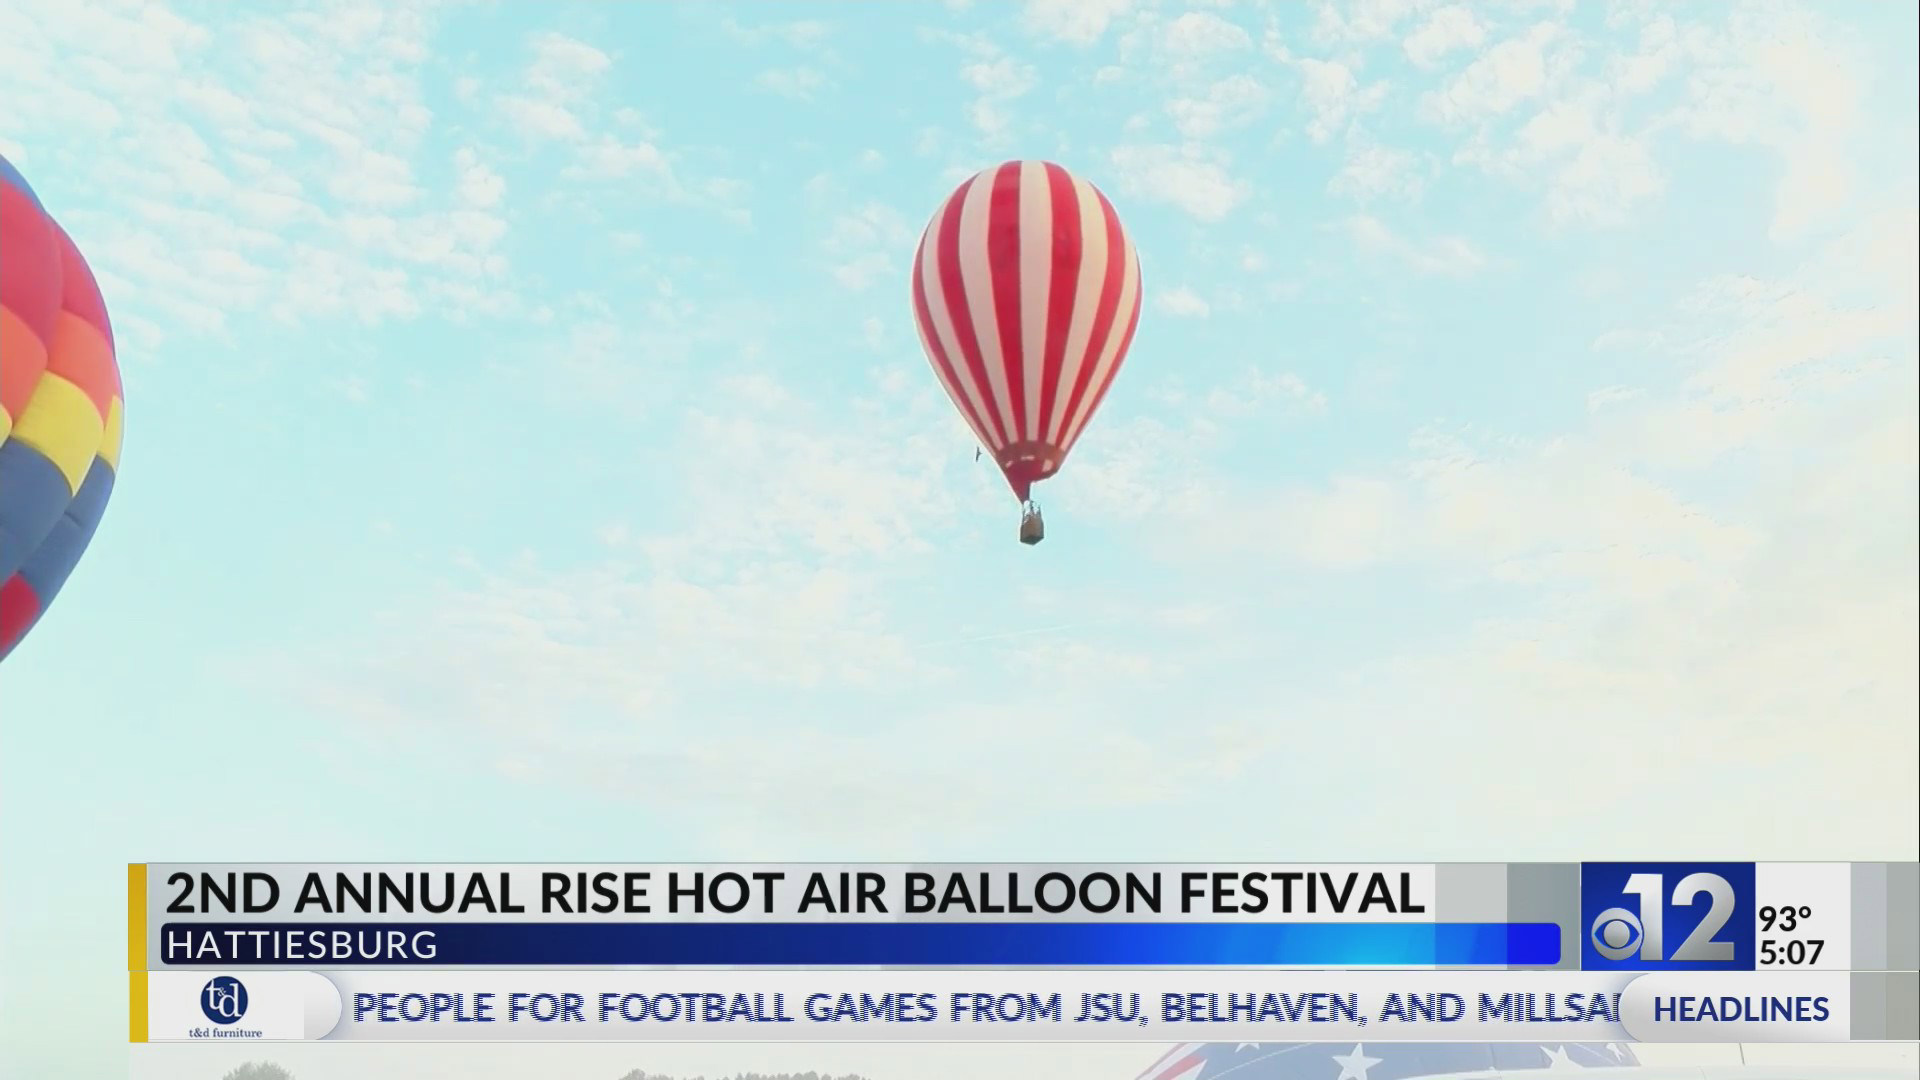 Hot air balloons in Hattiesburg! Here’s what to know about this weekend